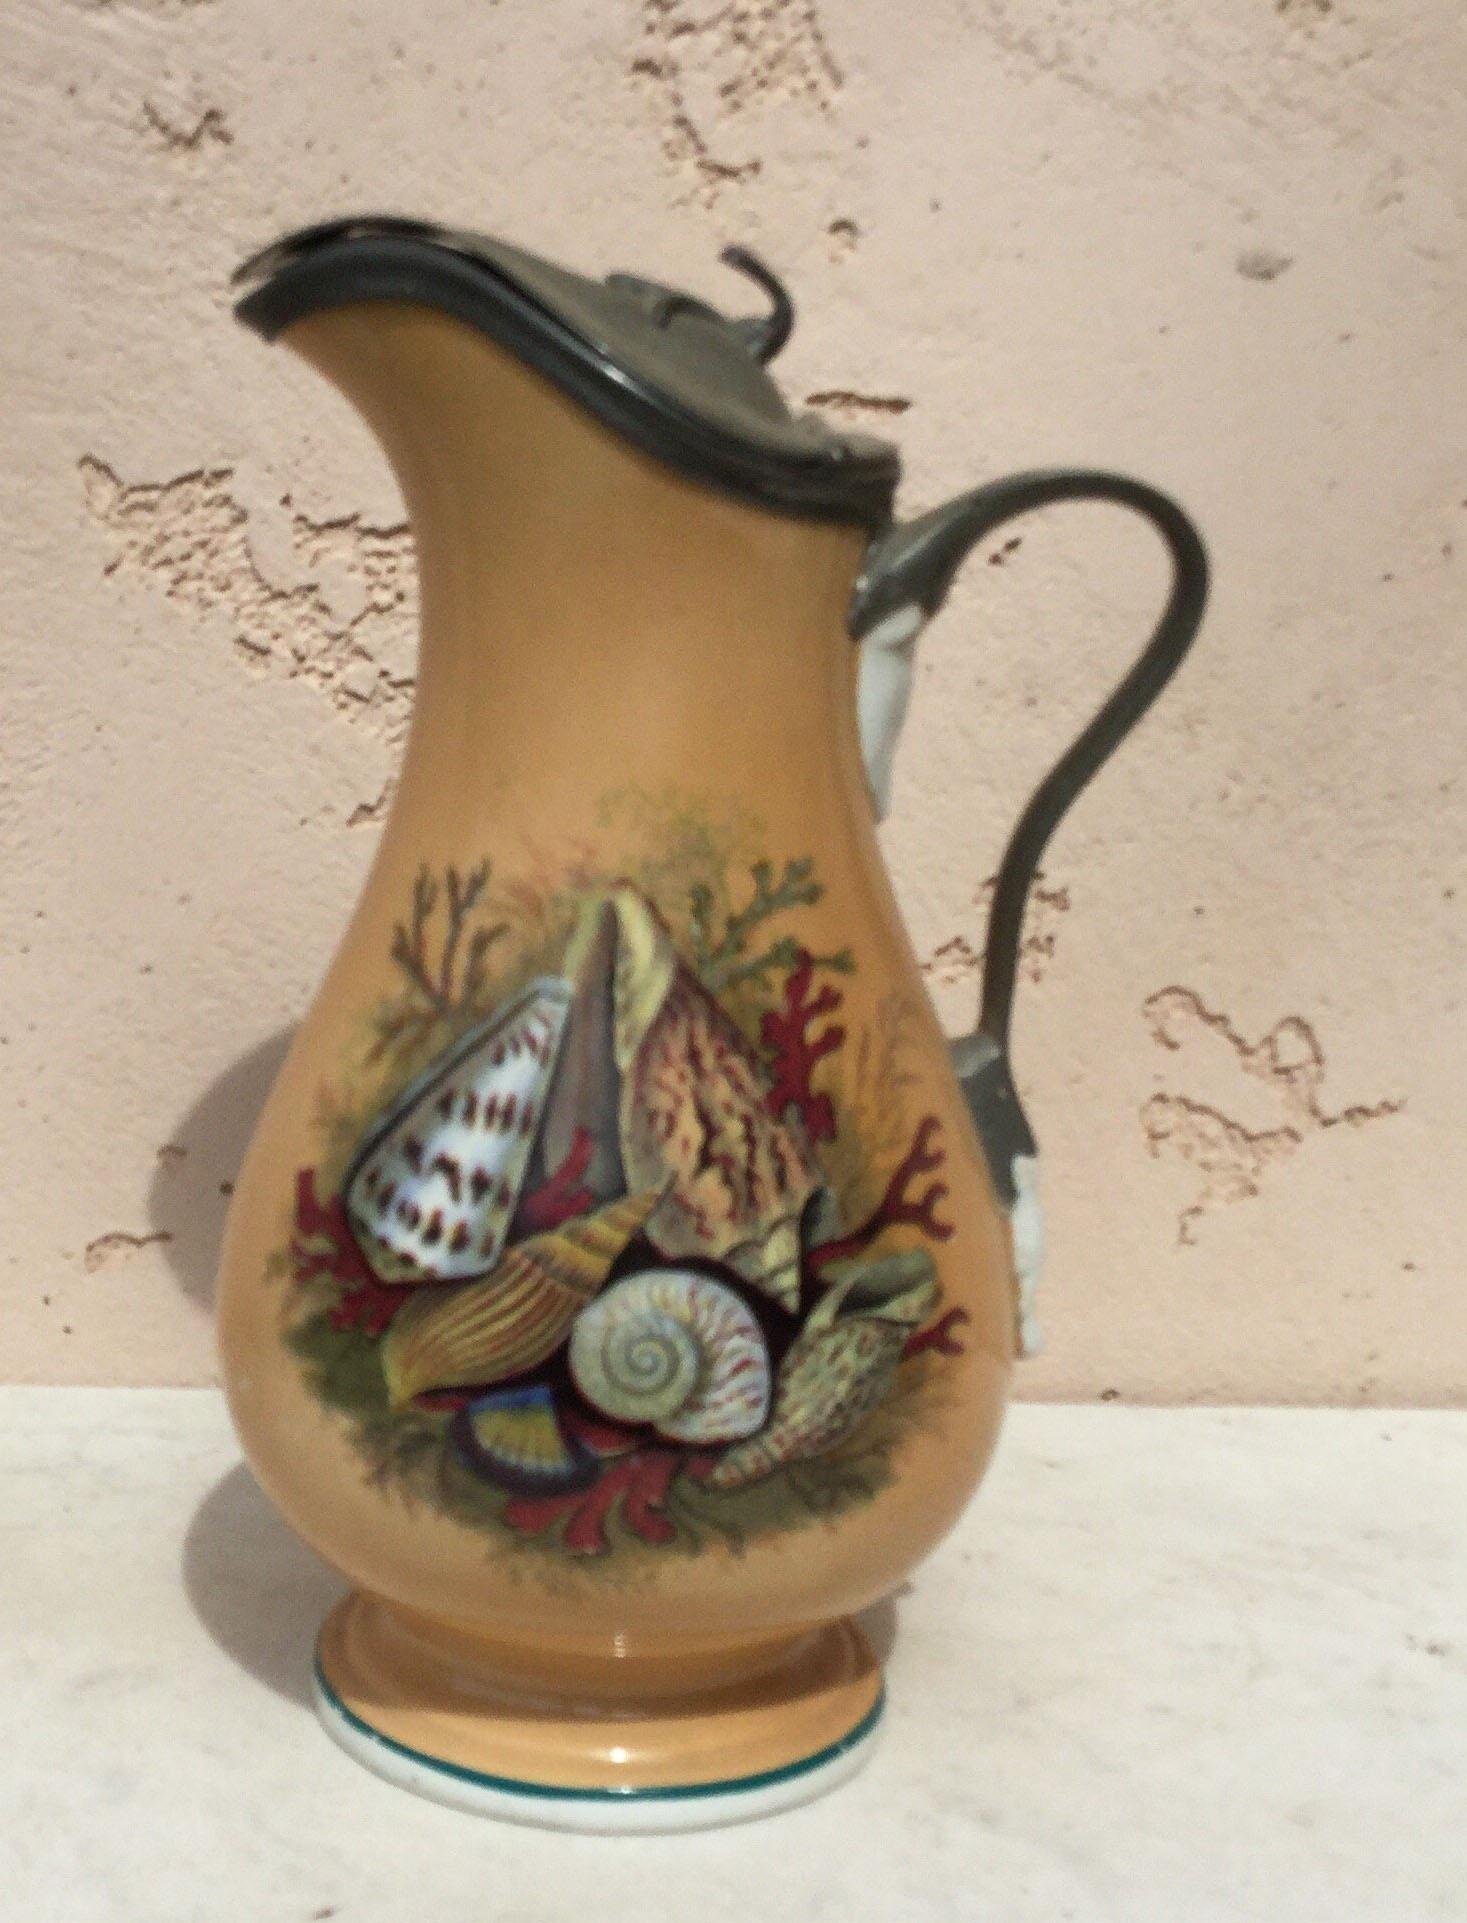 Antique English pitcher with seashells, seaweeds and coral with a metal lid.